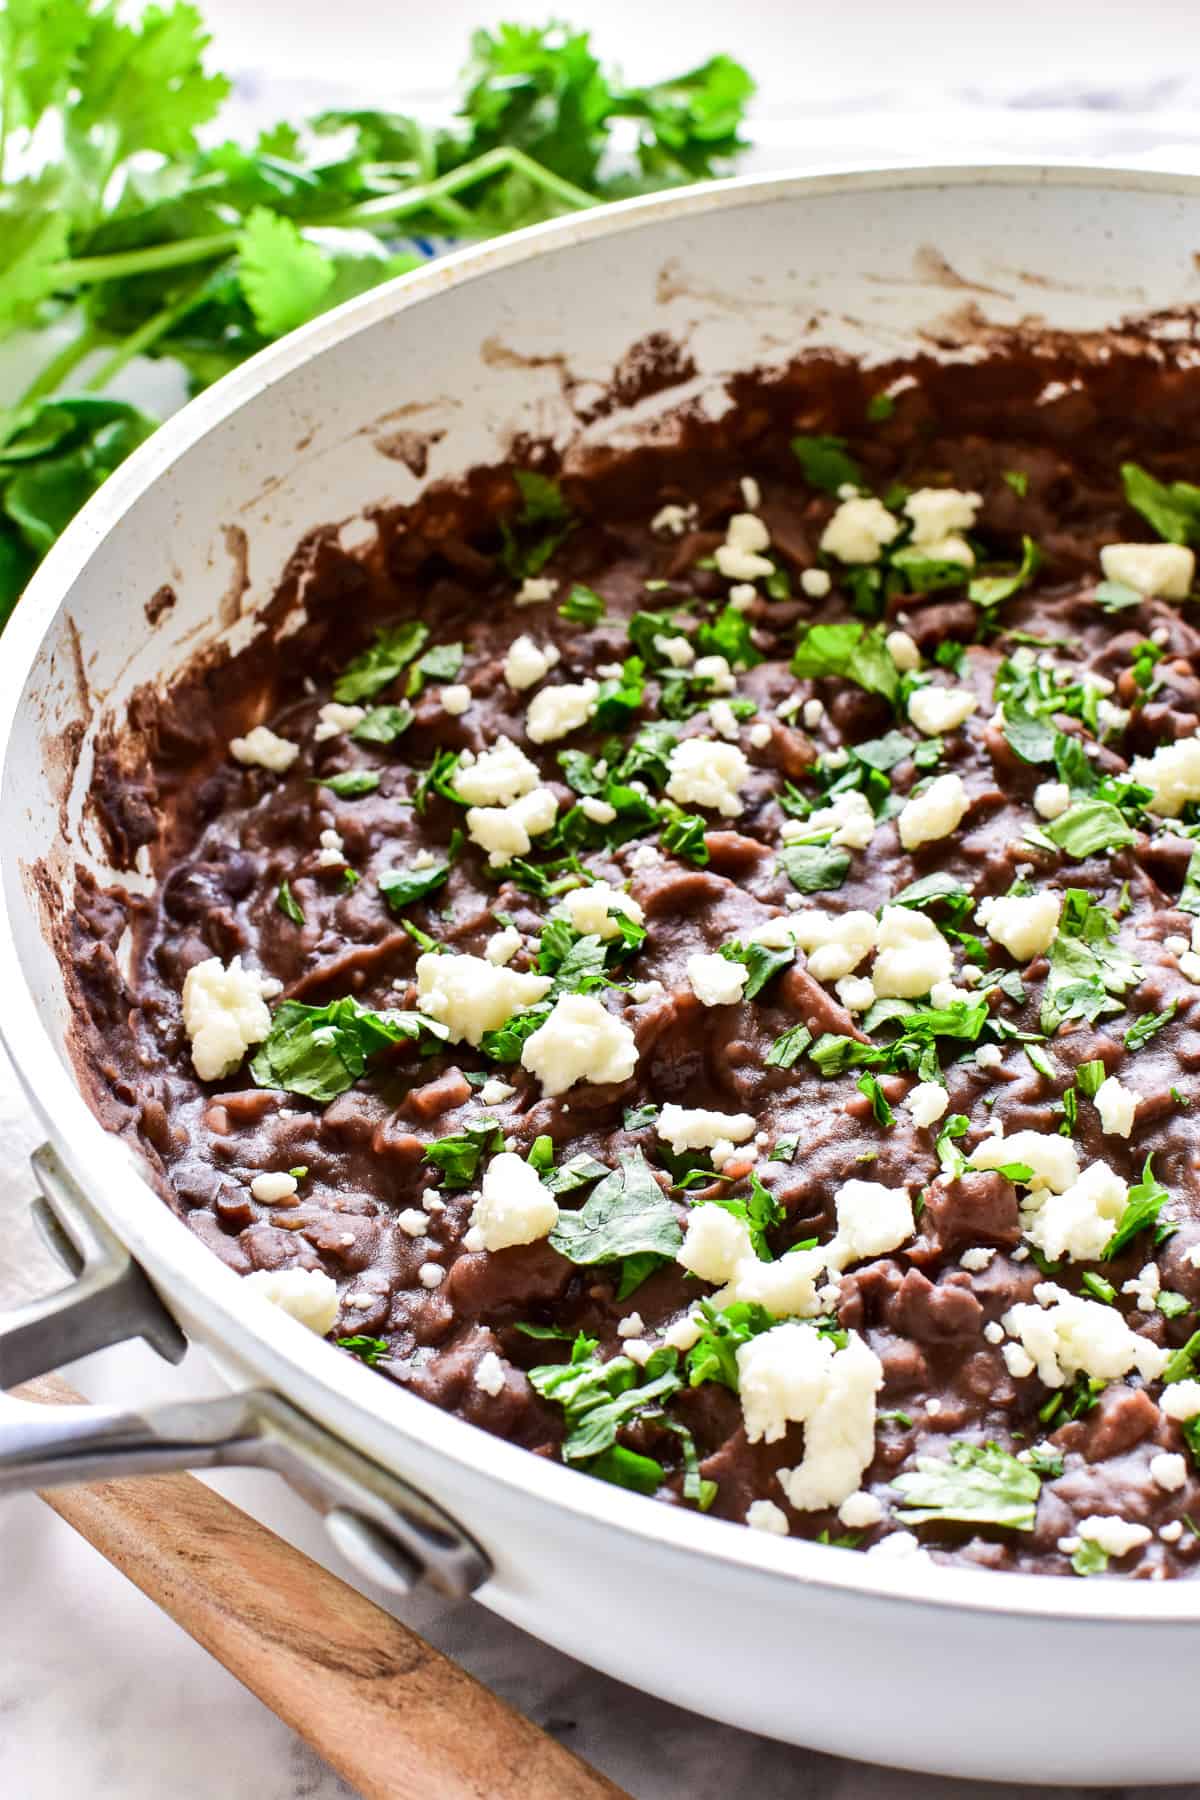 Refried Black Beans garninshed with queso fresco and cilantro